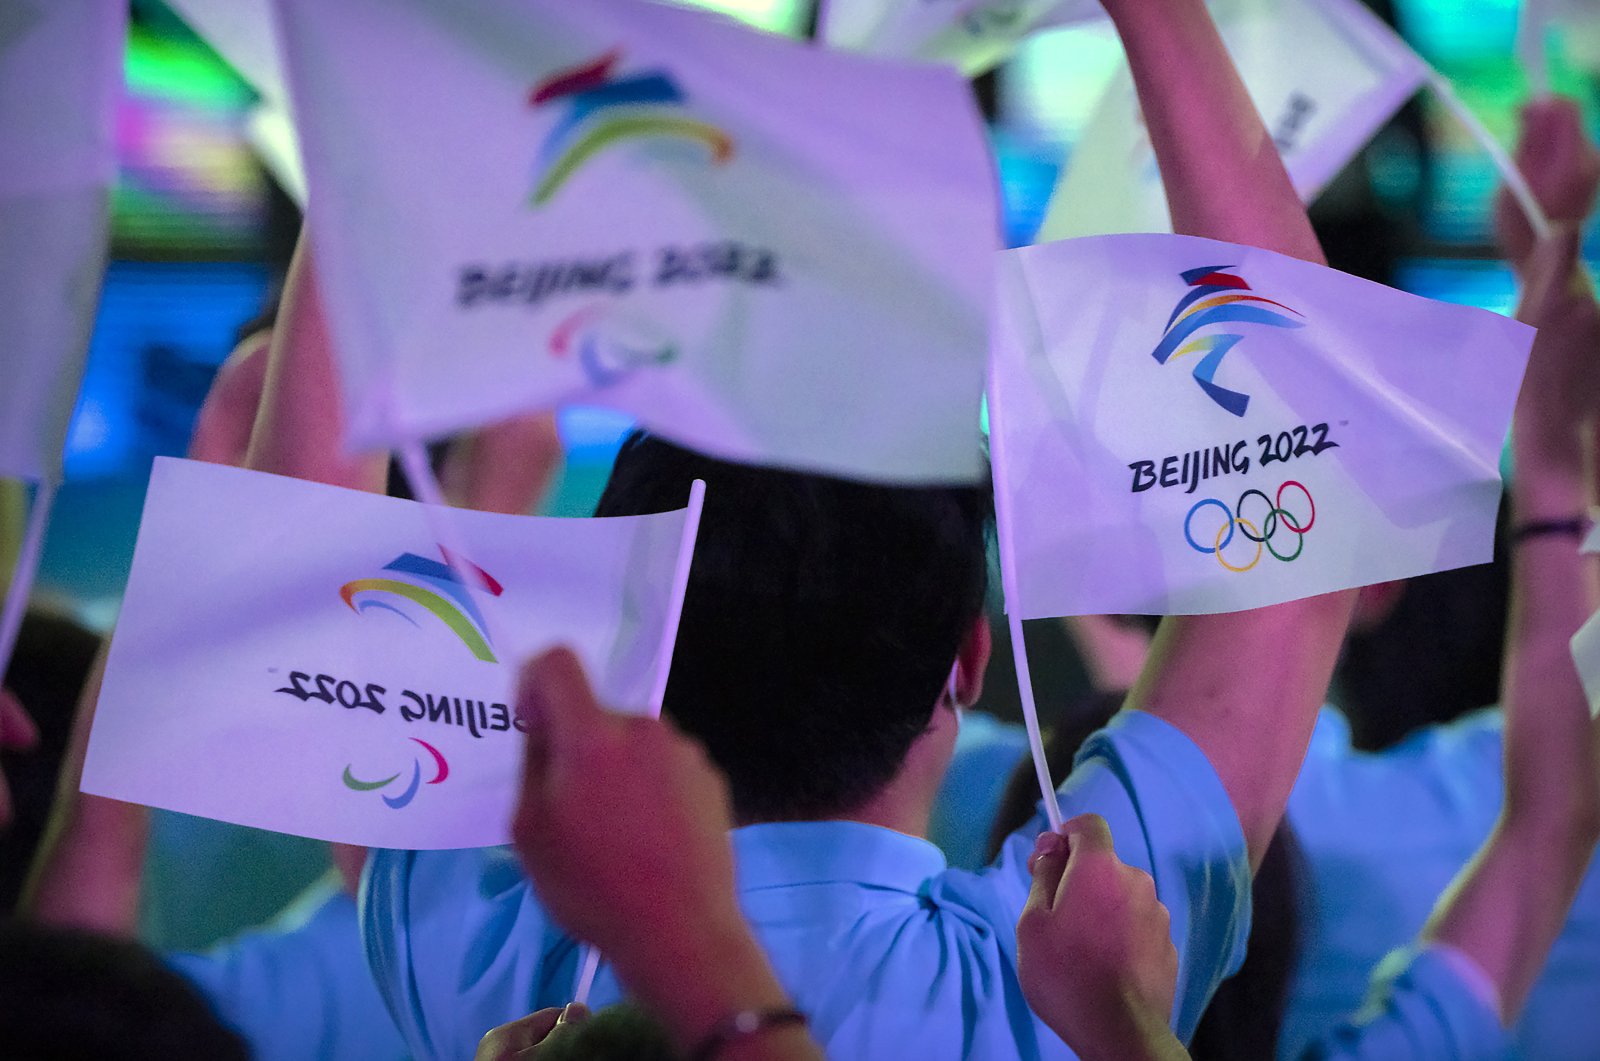 Participants wave flags with the logos of the 2022 Beijing Winter Olympics and Paralympics during an event in Beijing, China, Sept. 17, 2021. (AP Photo)